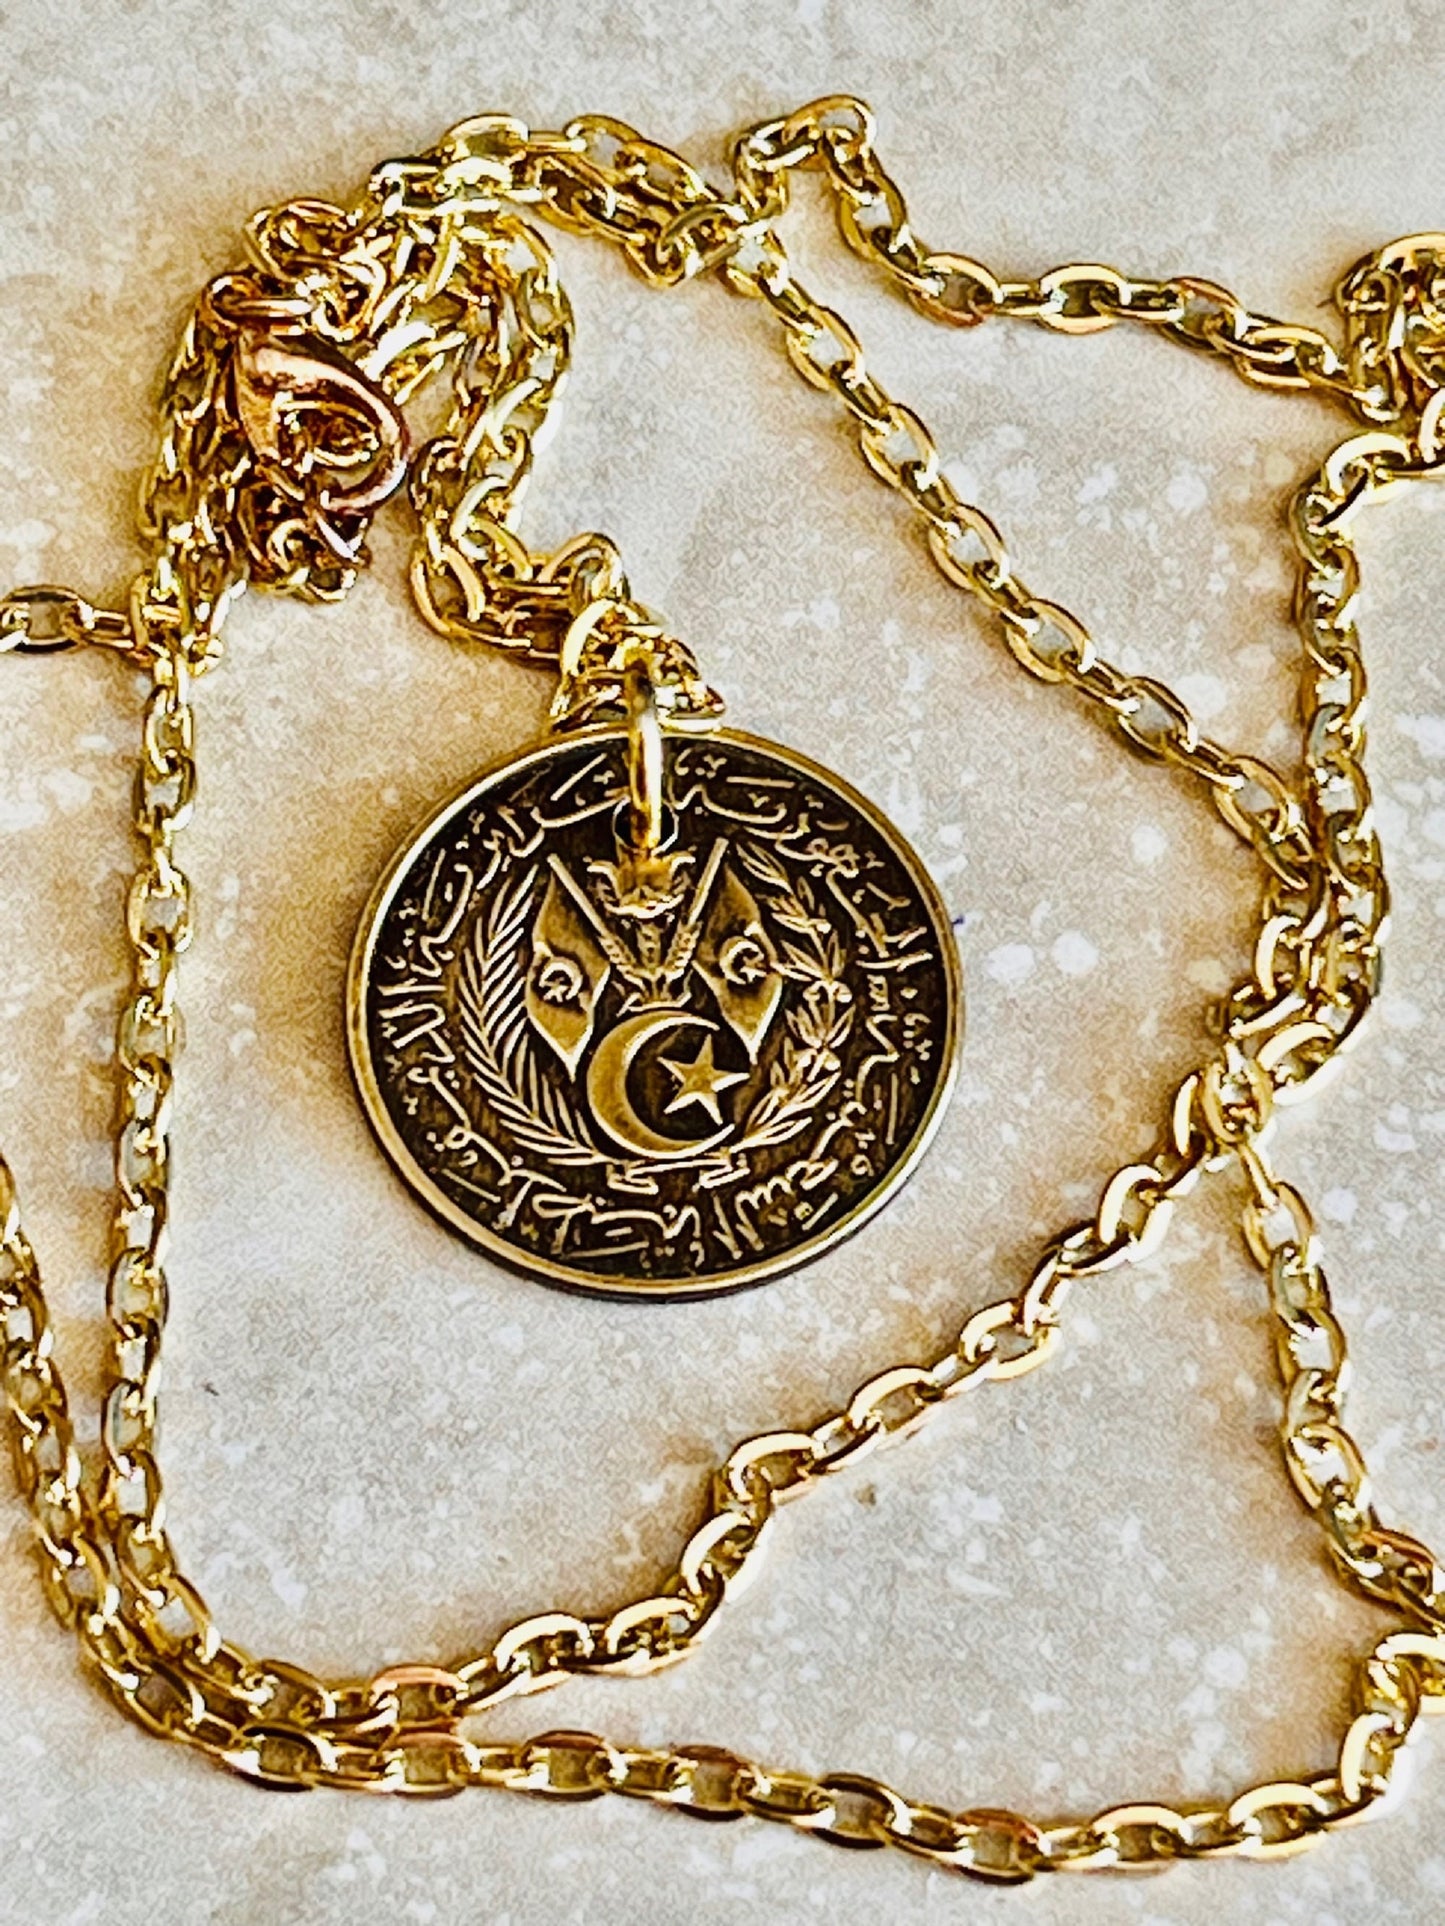 Algeria 50 Centimes Coin Pendant Algerian Personal Necklace Old Vintage Handmade Jewelry Gift Friend Charm For Him Her World Coin Collector